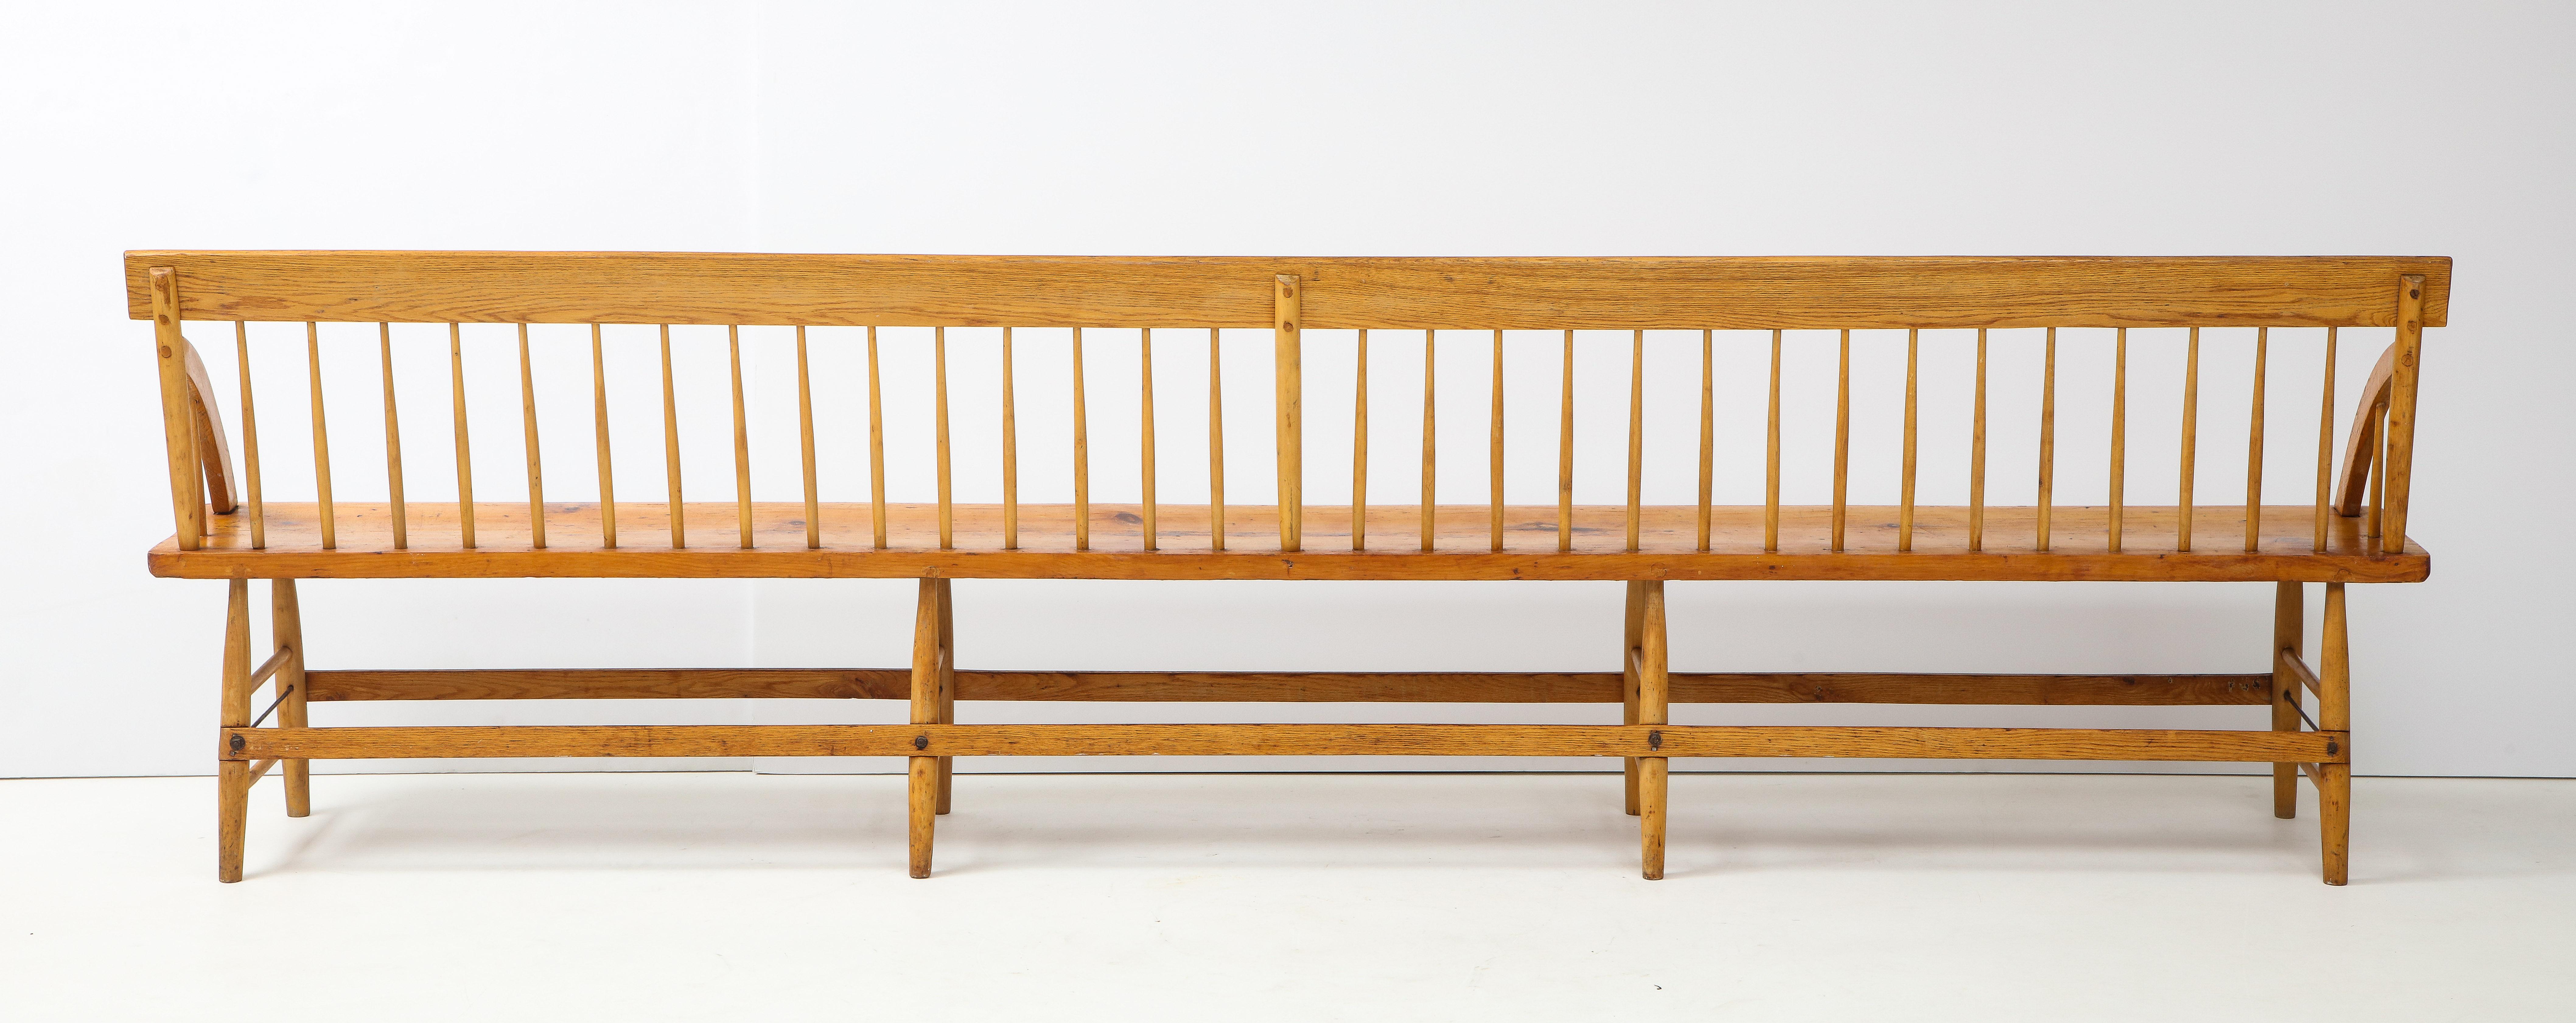 Exceptional 19th C. Hand Made Quaker Meeting House Bench, New England/Cape Cod 7